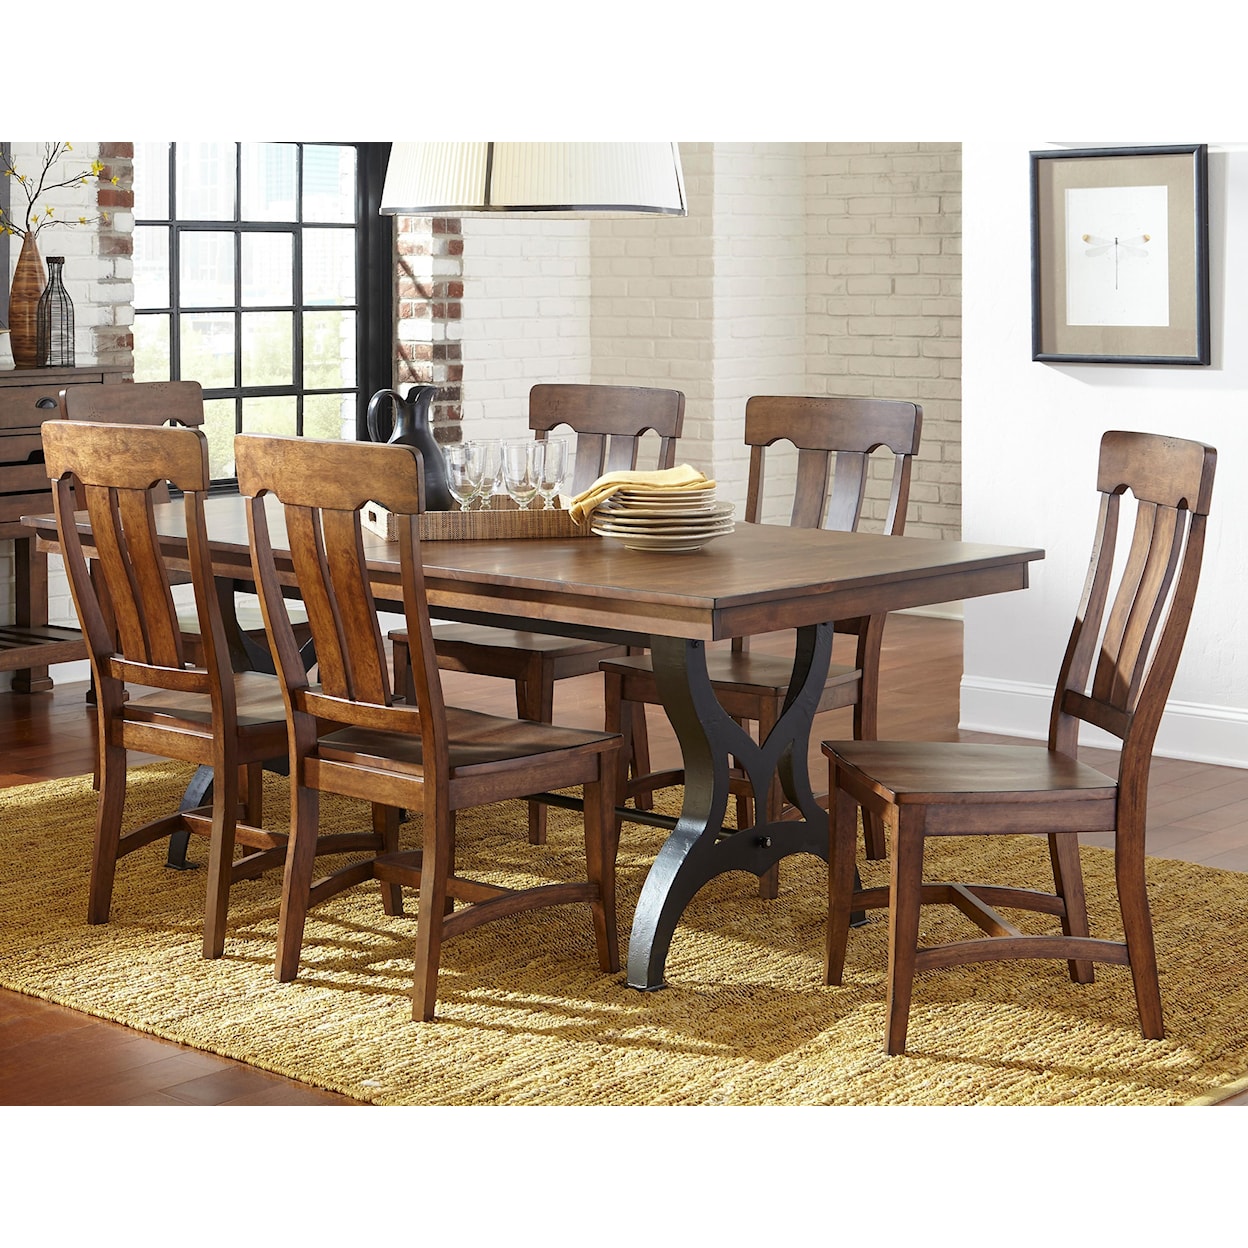 Intercon The District 5 Piece Table & Chair Set with Leaf